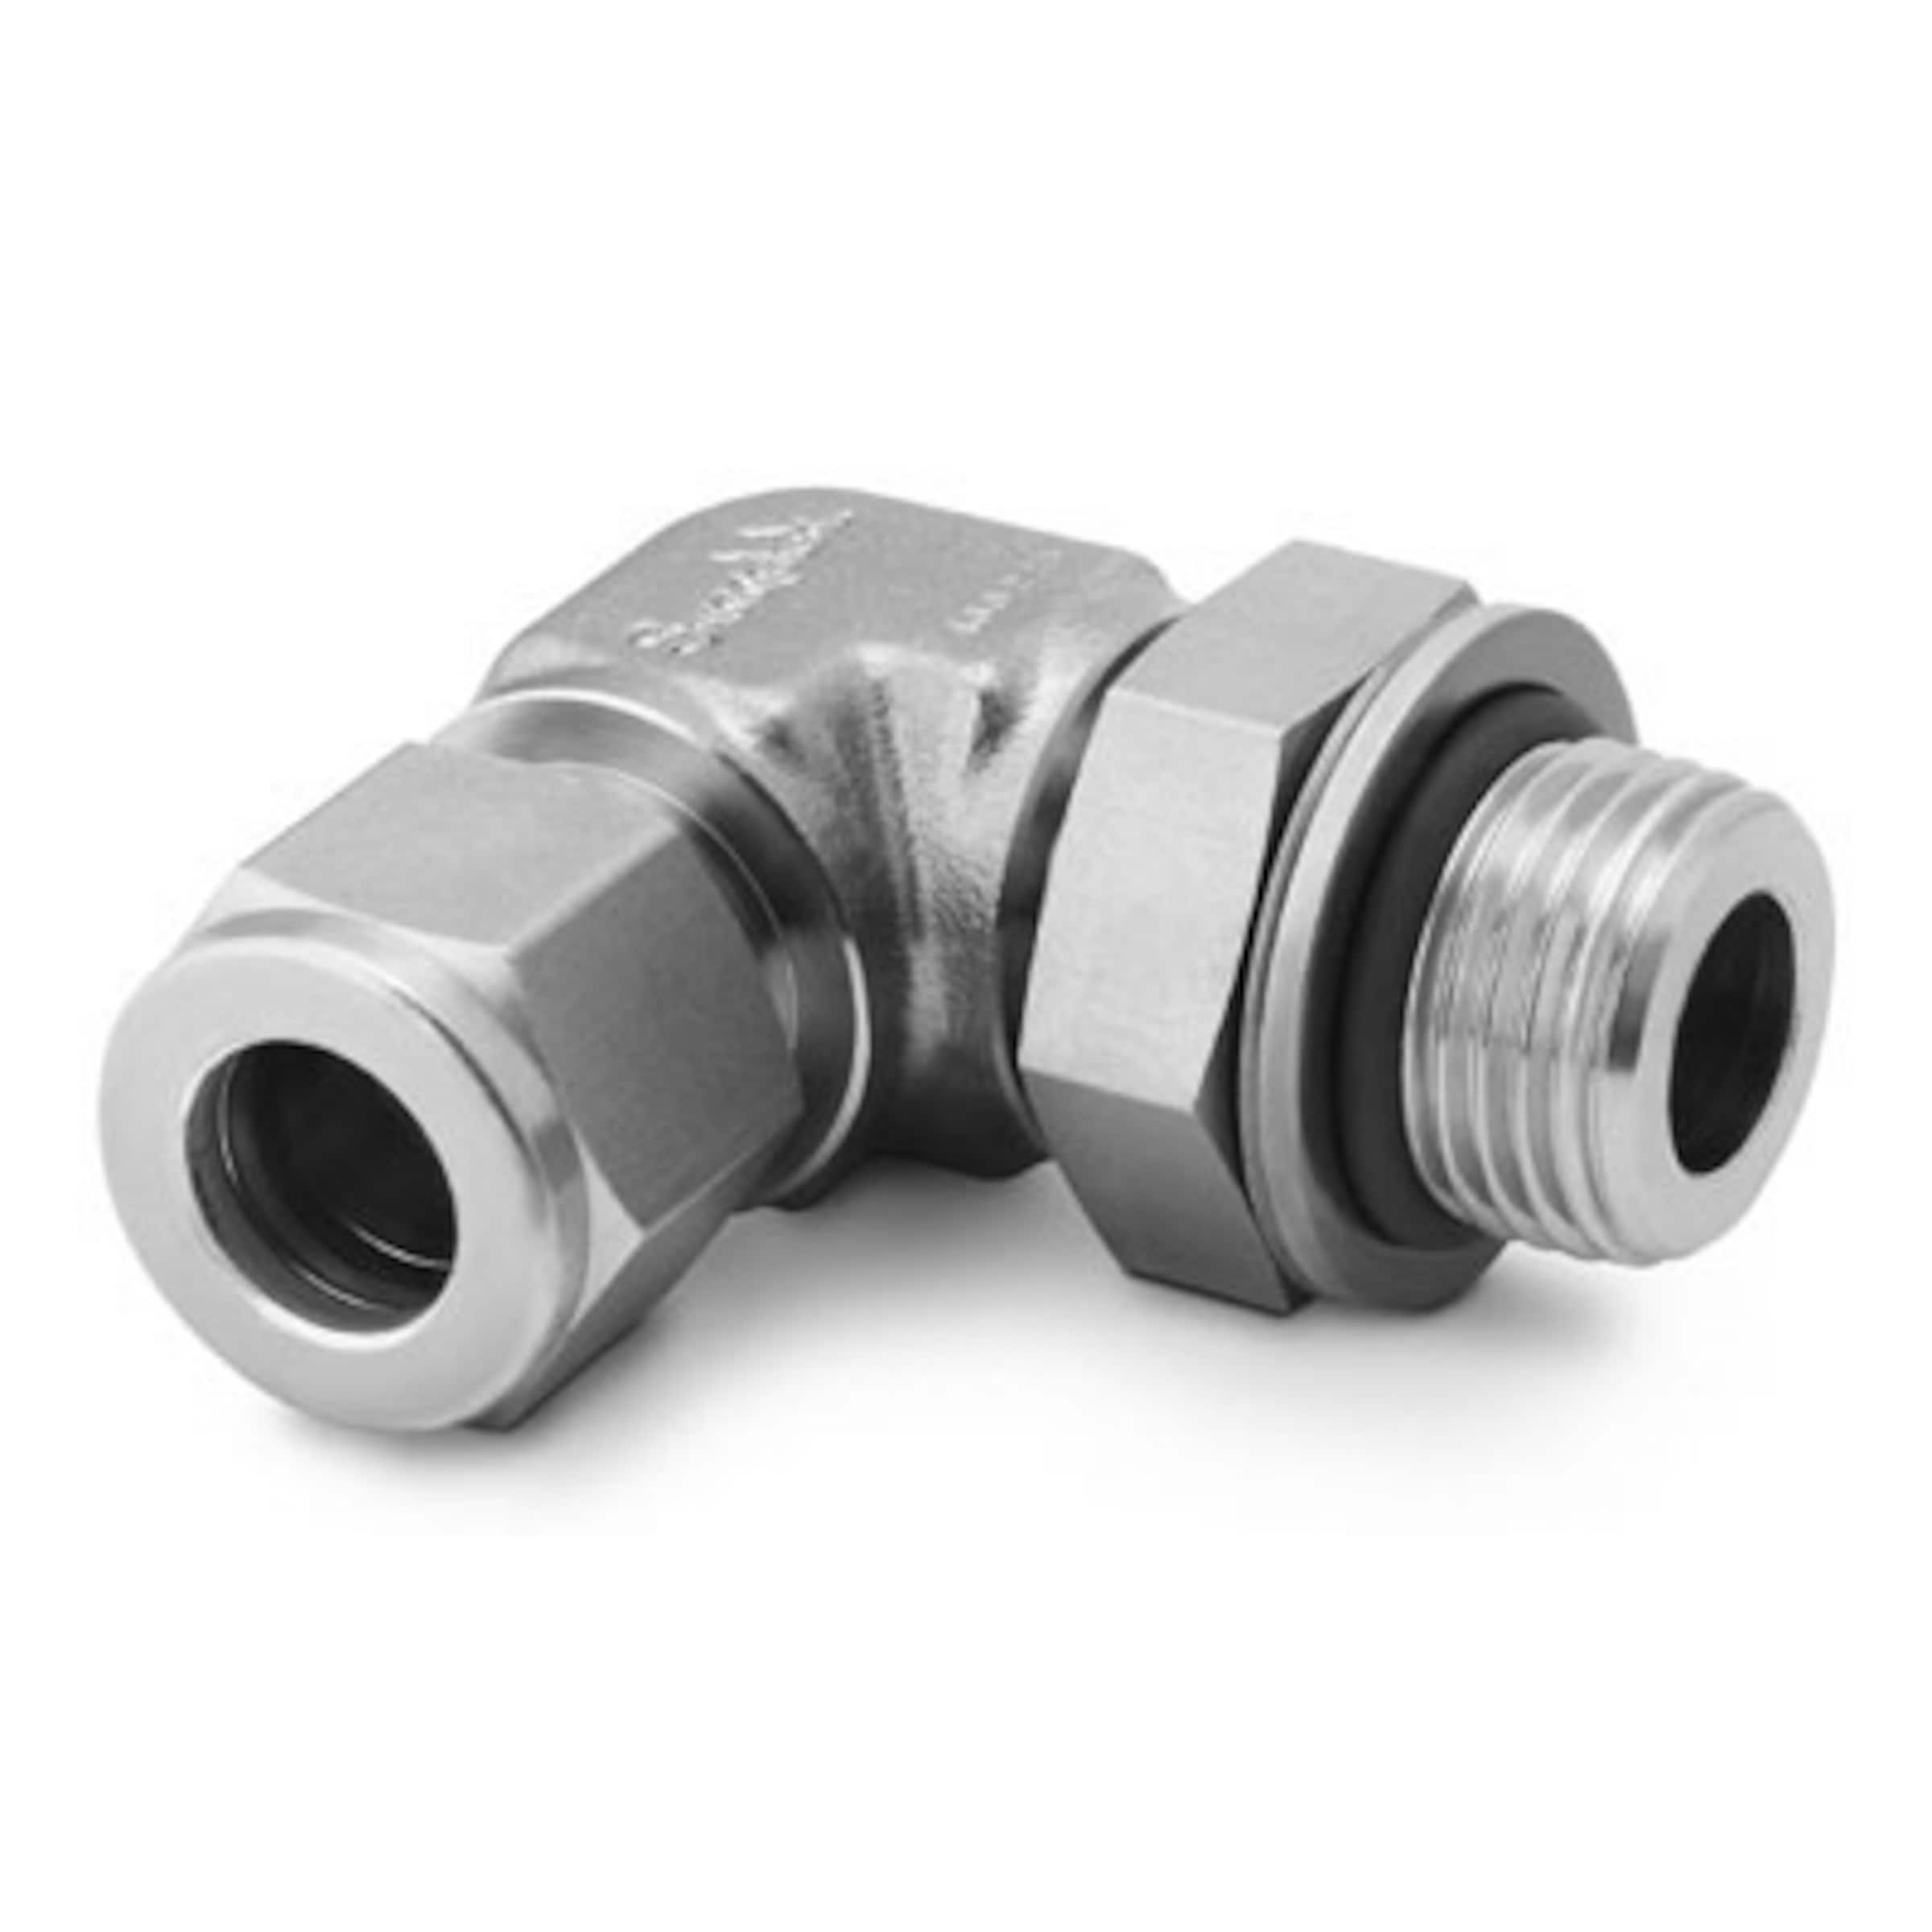 Swagelok SS-400-1-2 Stainless steel connector fitting 1/4 tube x 1/8 ...